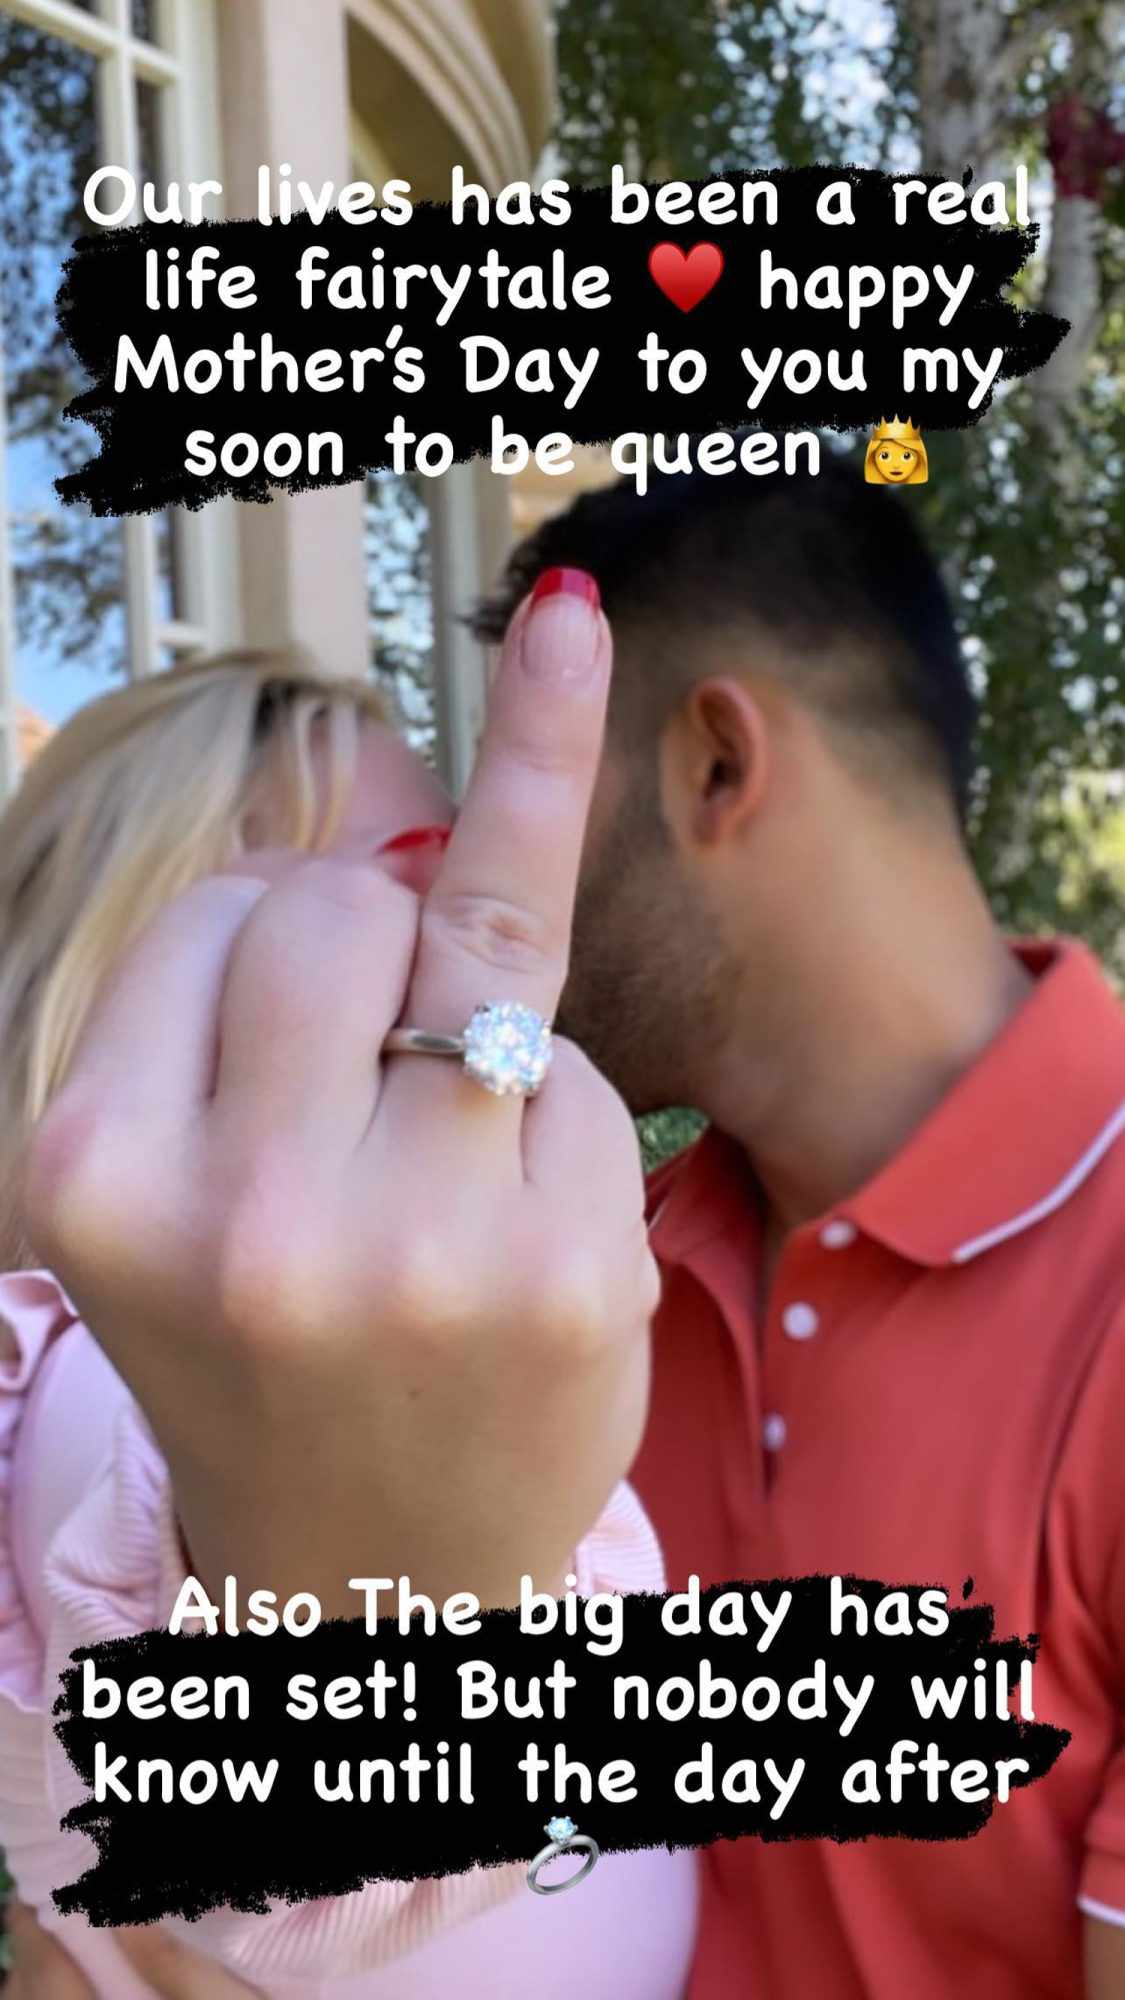 Britney Spears Shares Glimpse of Wedding Look as Fiancé Sam Asghari Teases a Date 'Has Been Set'